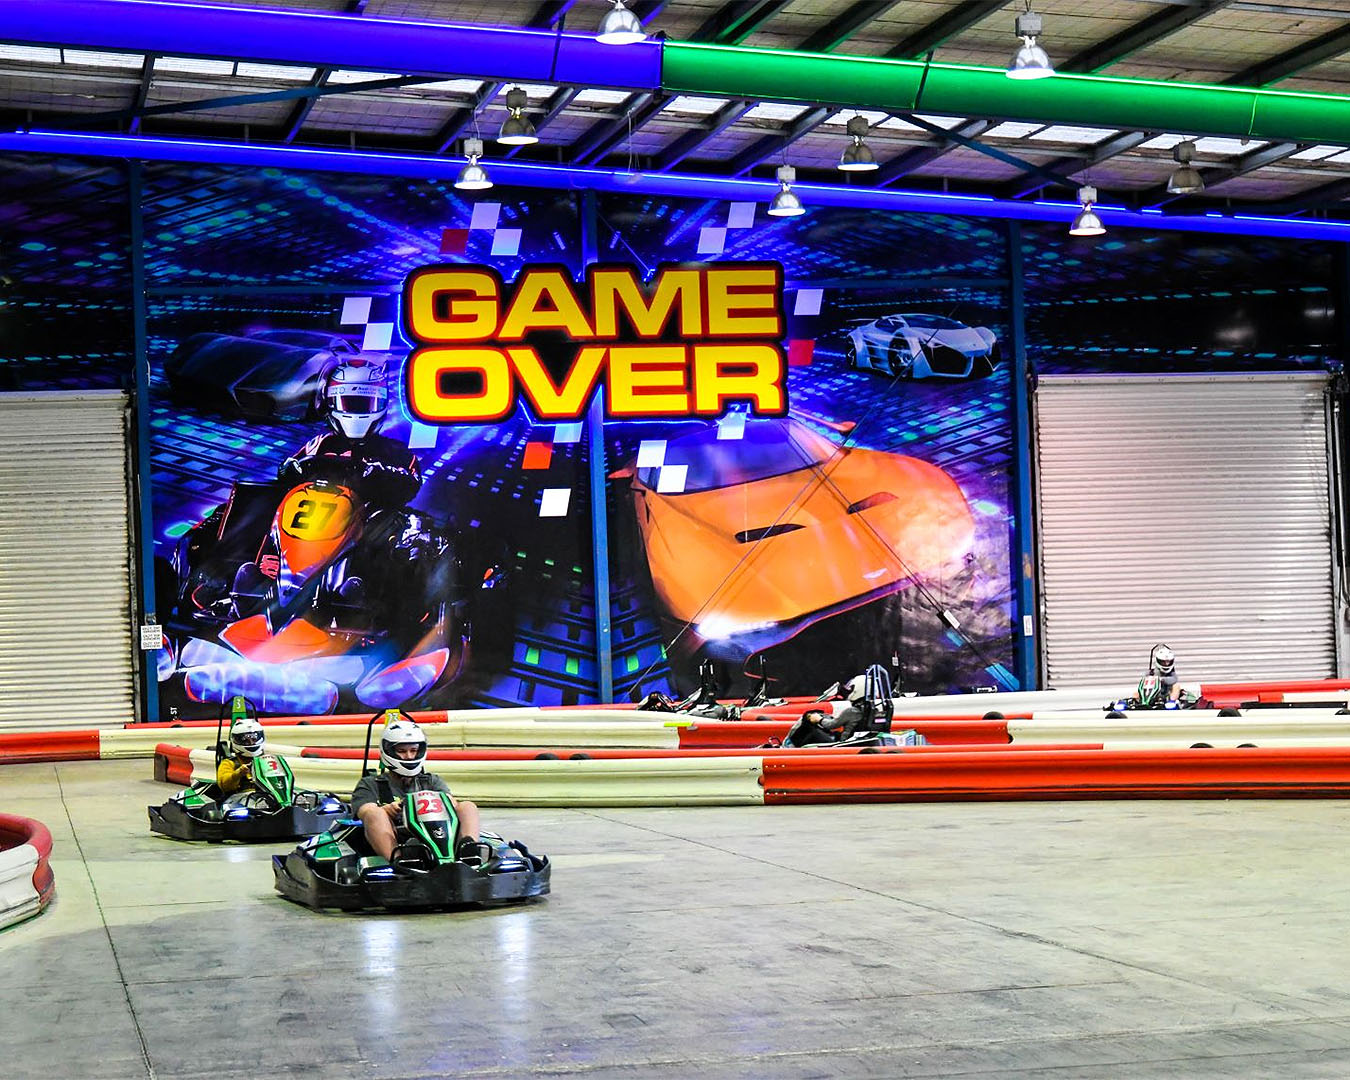 People on the track at Game Over, one of the best go karting tracks in auckland.